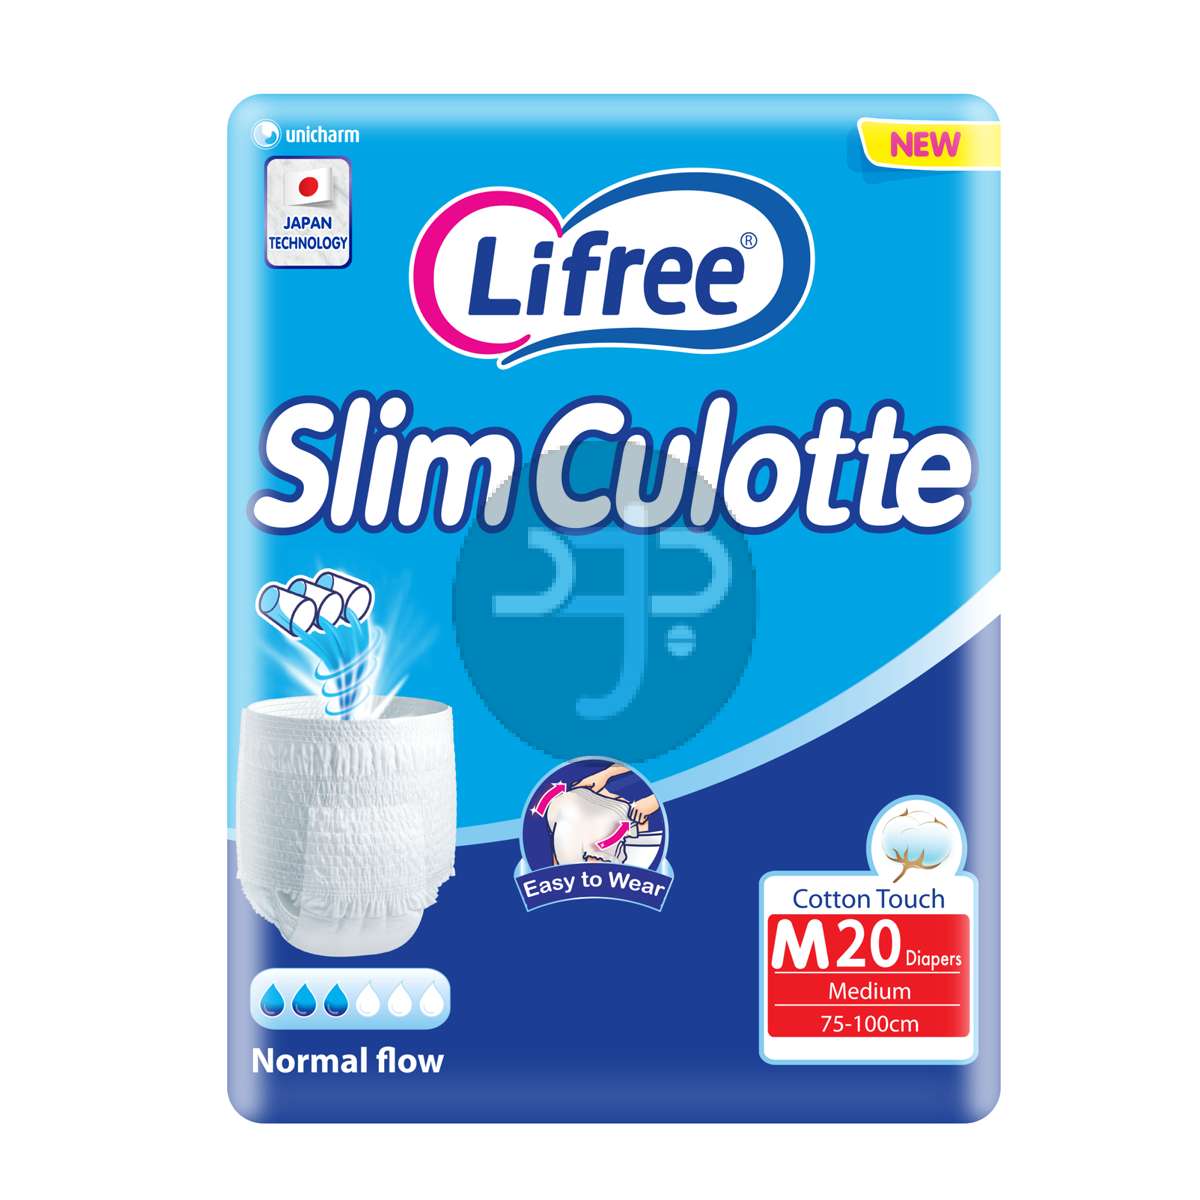 Product-Lifree Slim Culotte Adult Diaper Pants, Medium Size, 3 Cup Absorbency , Jumbo Pack, 20 Pieces